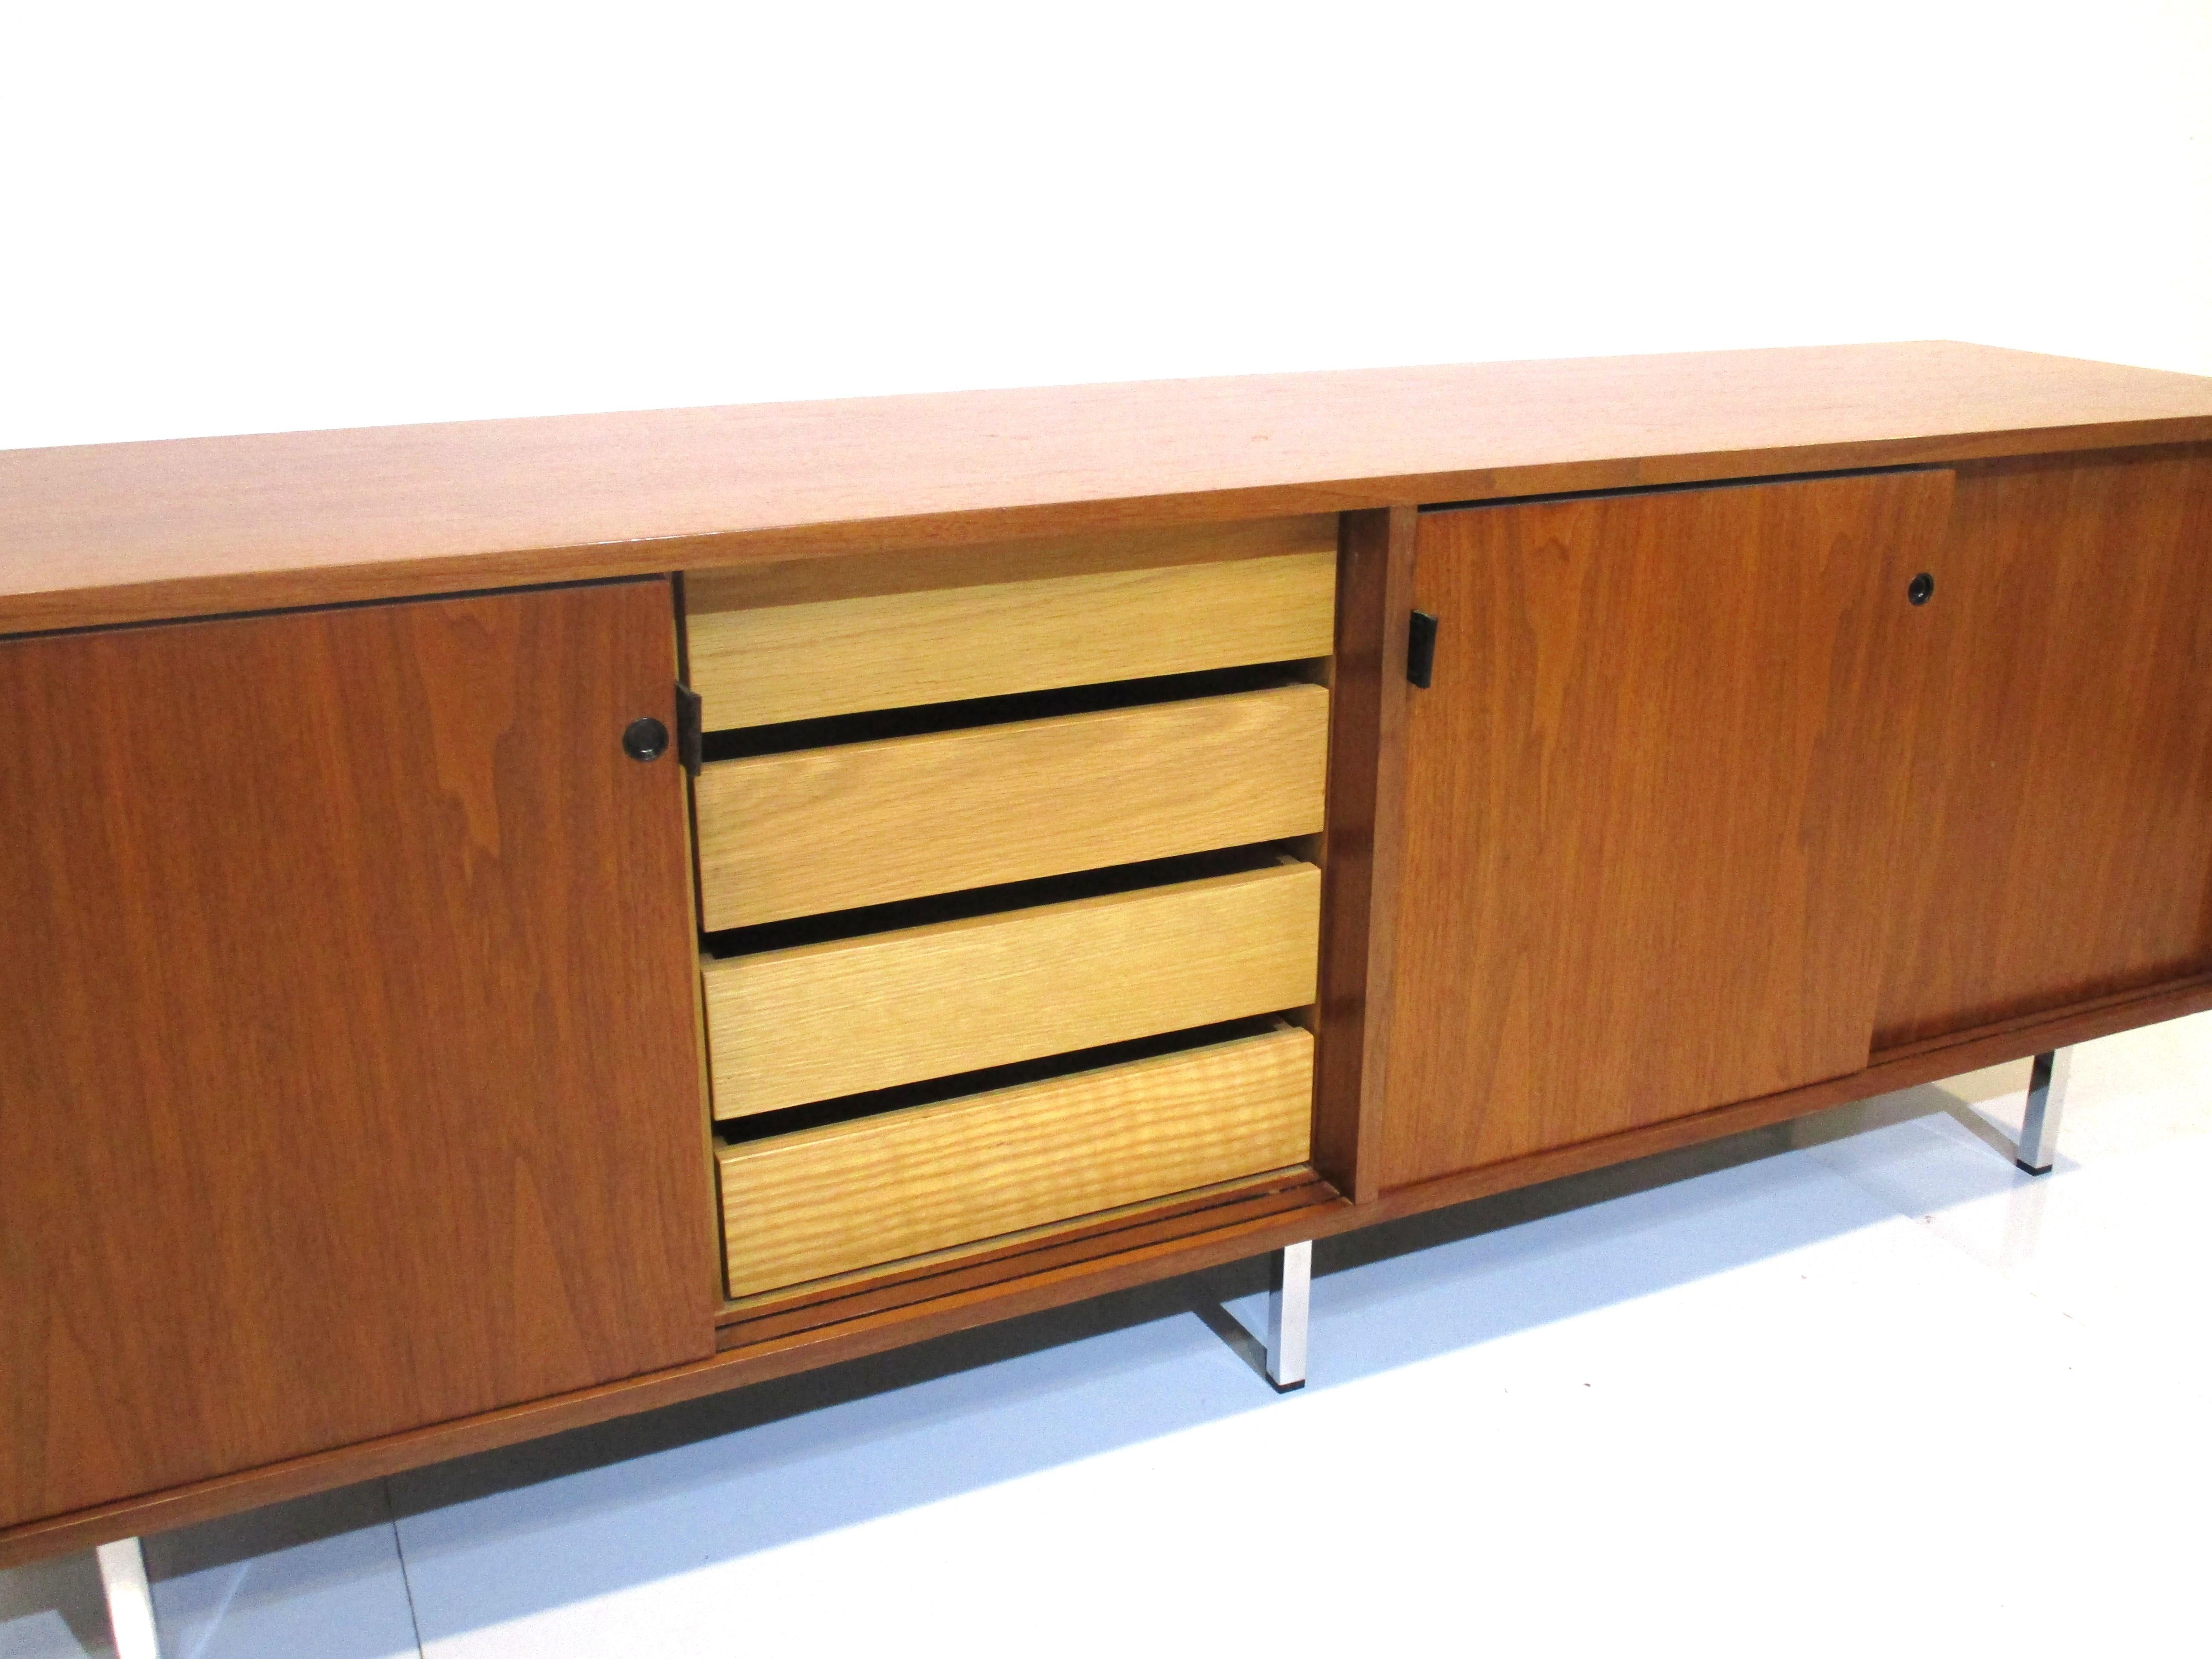 20th Century Florence Knoll Walnut Credenza / Sideboard for Knoll